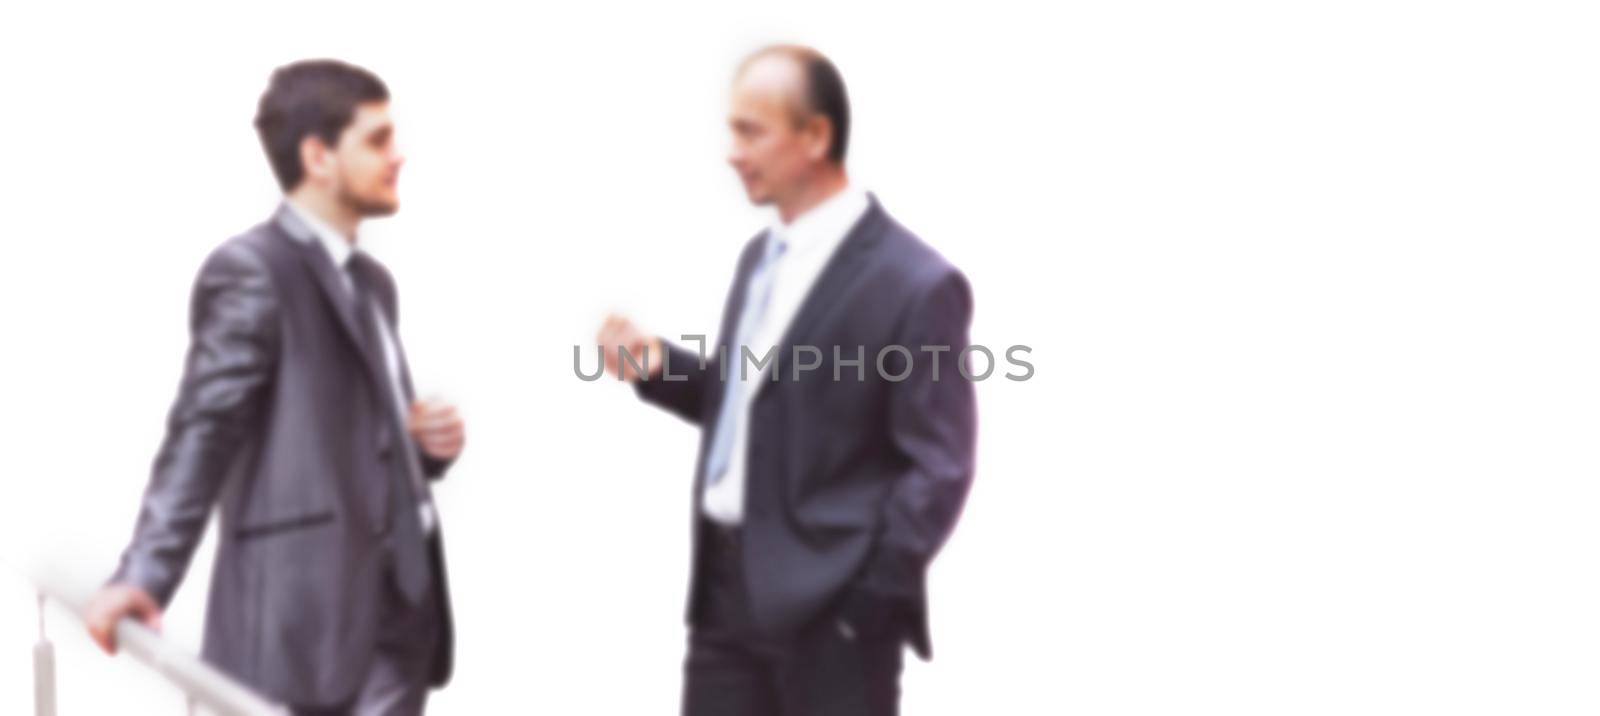 blurred image for the advertising text. photo with copy space. business colleagues discussing business issues by SmartPhotoLab